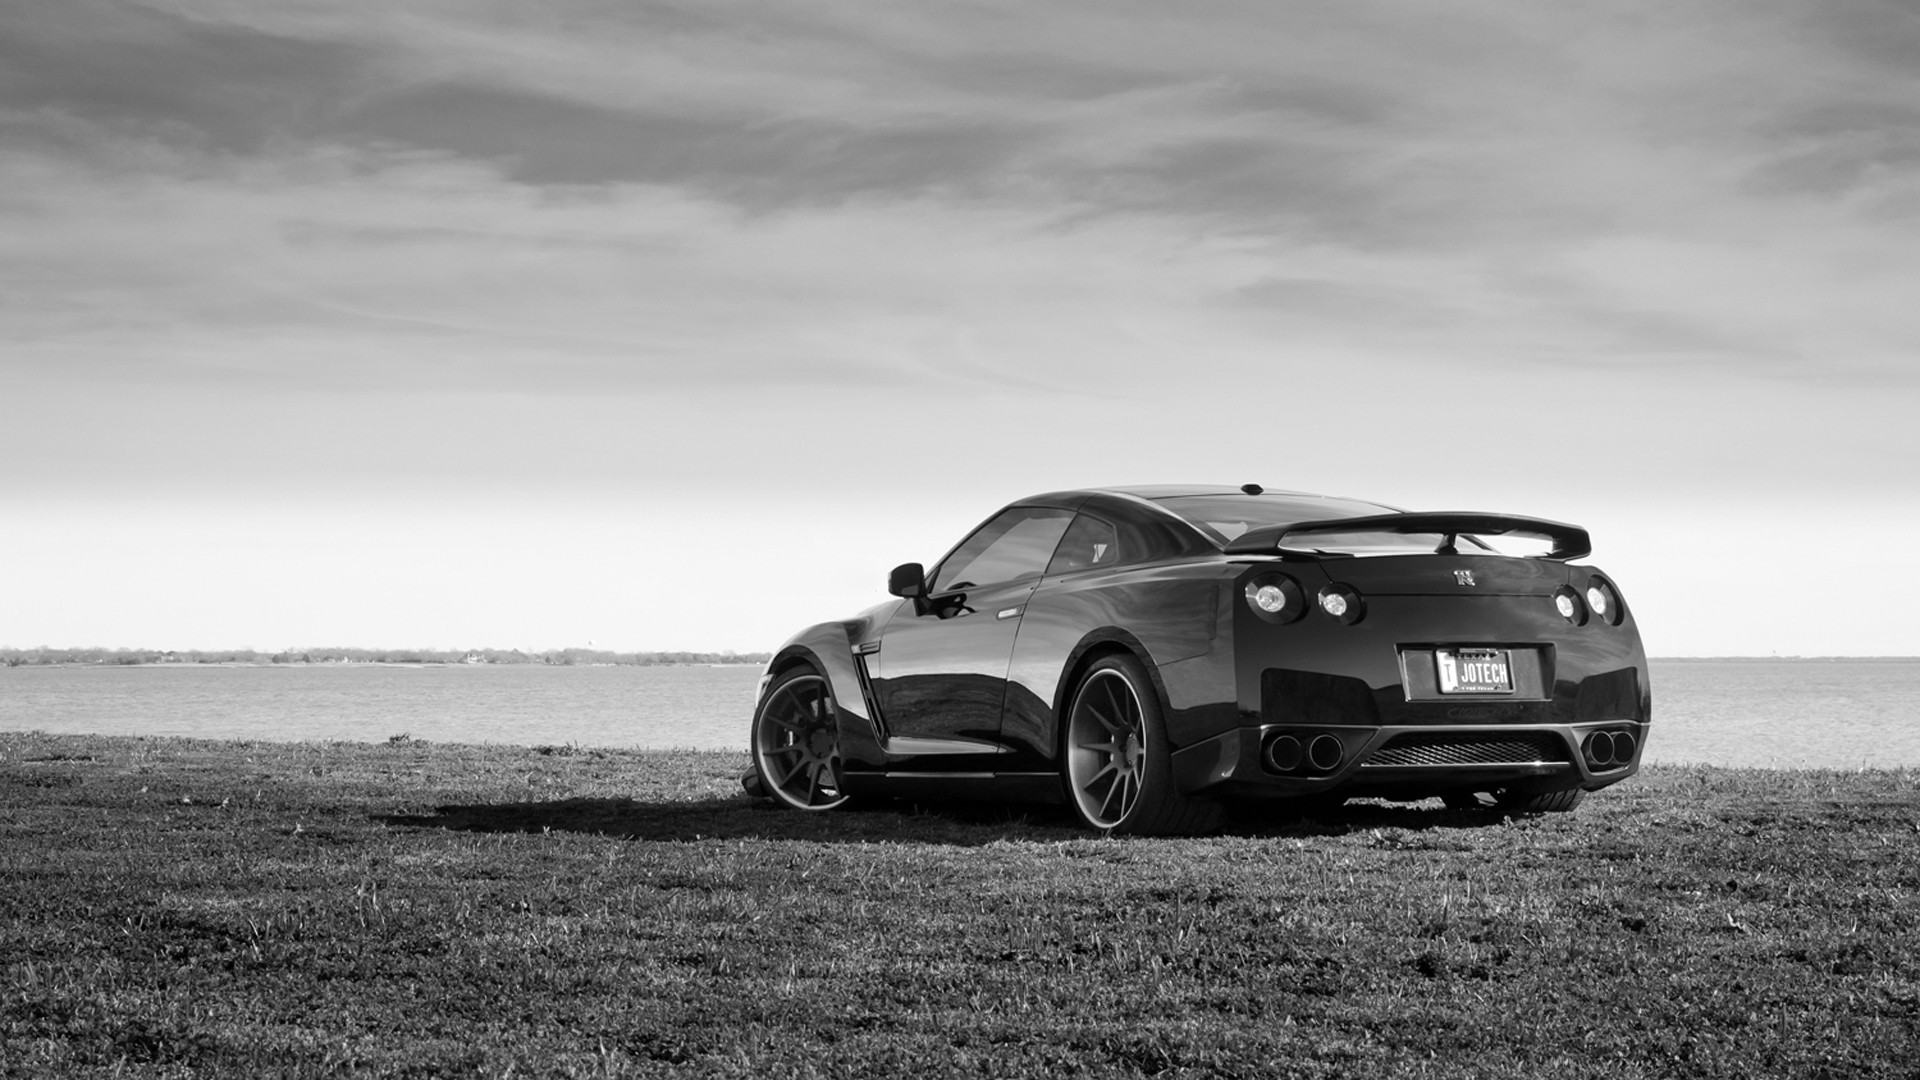 Black And White Photo Of A Car On The Beach Desktop Wallpaper